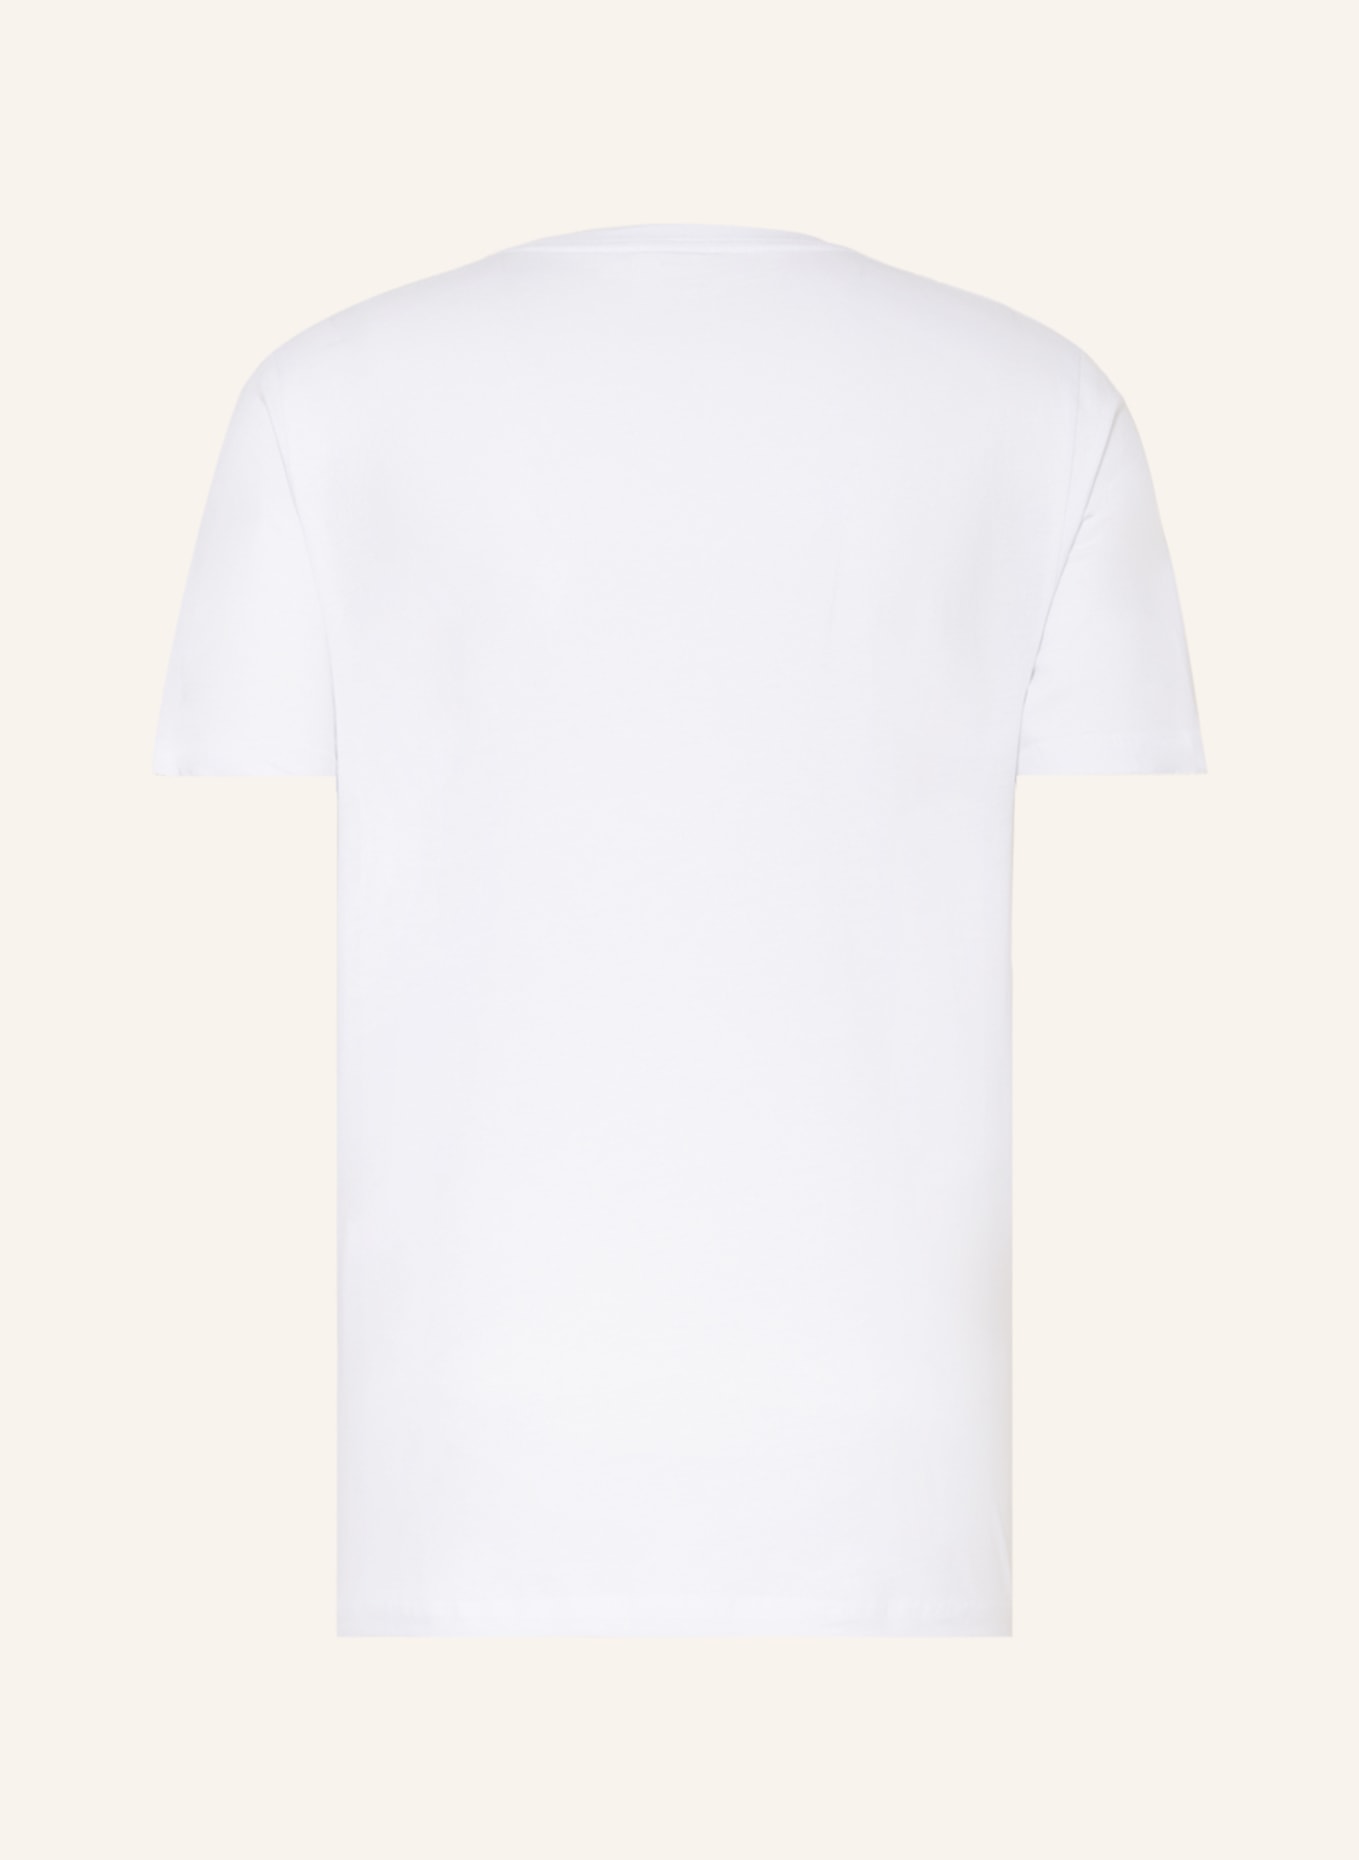 REISS 3-pack T-shirts BLESS, Color: DARK BLUE/ GRAY/ WHITE (Image 2)